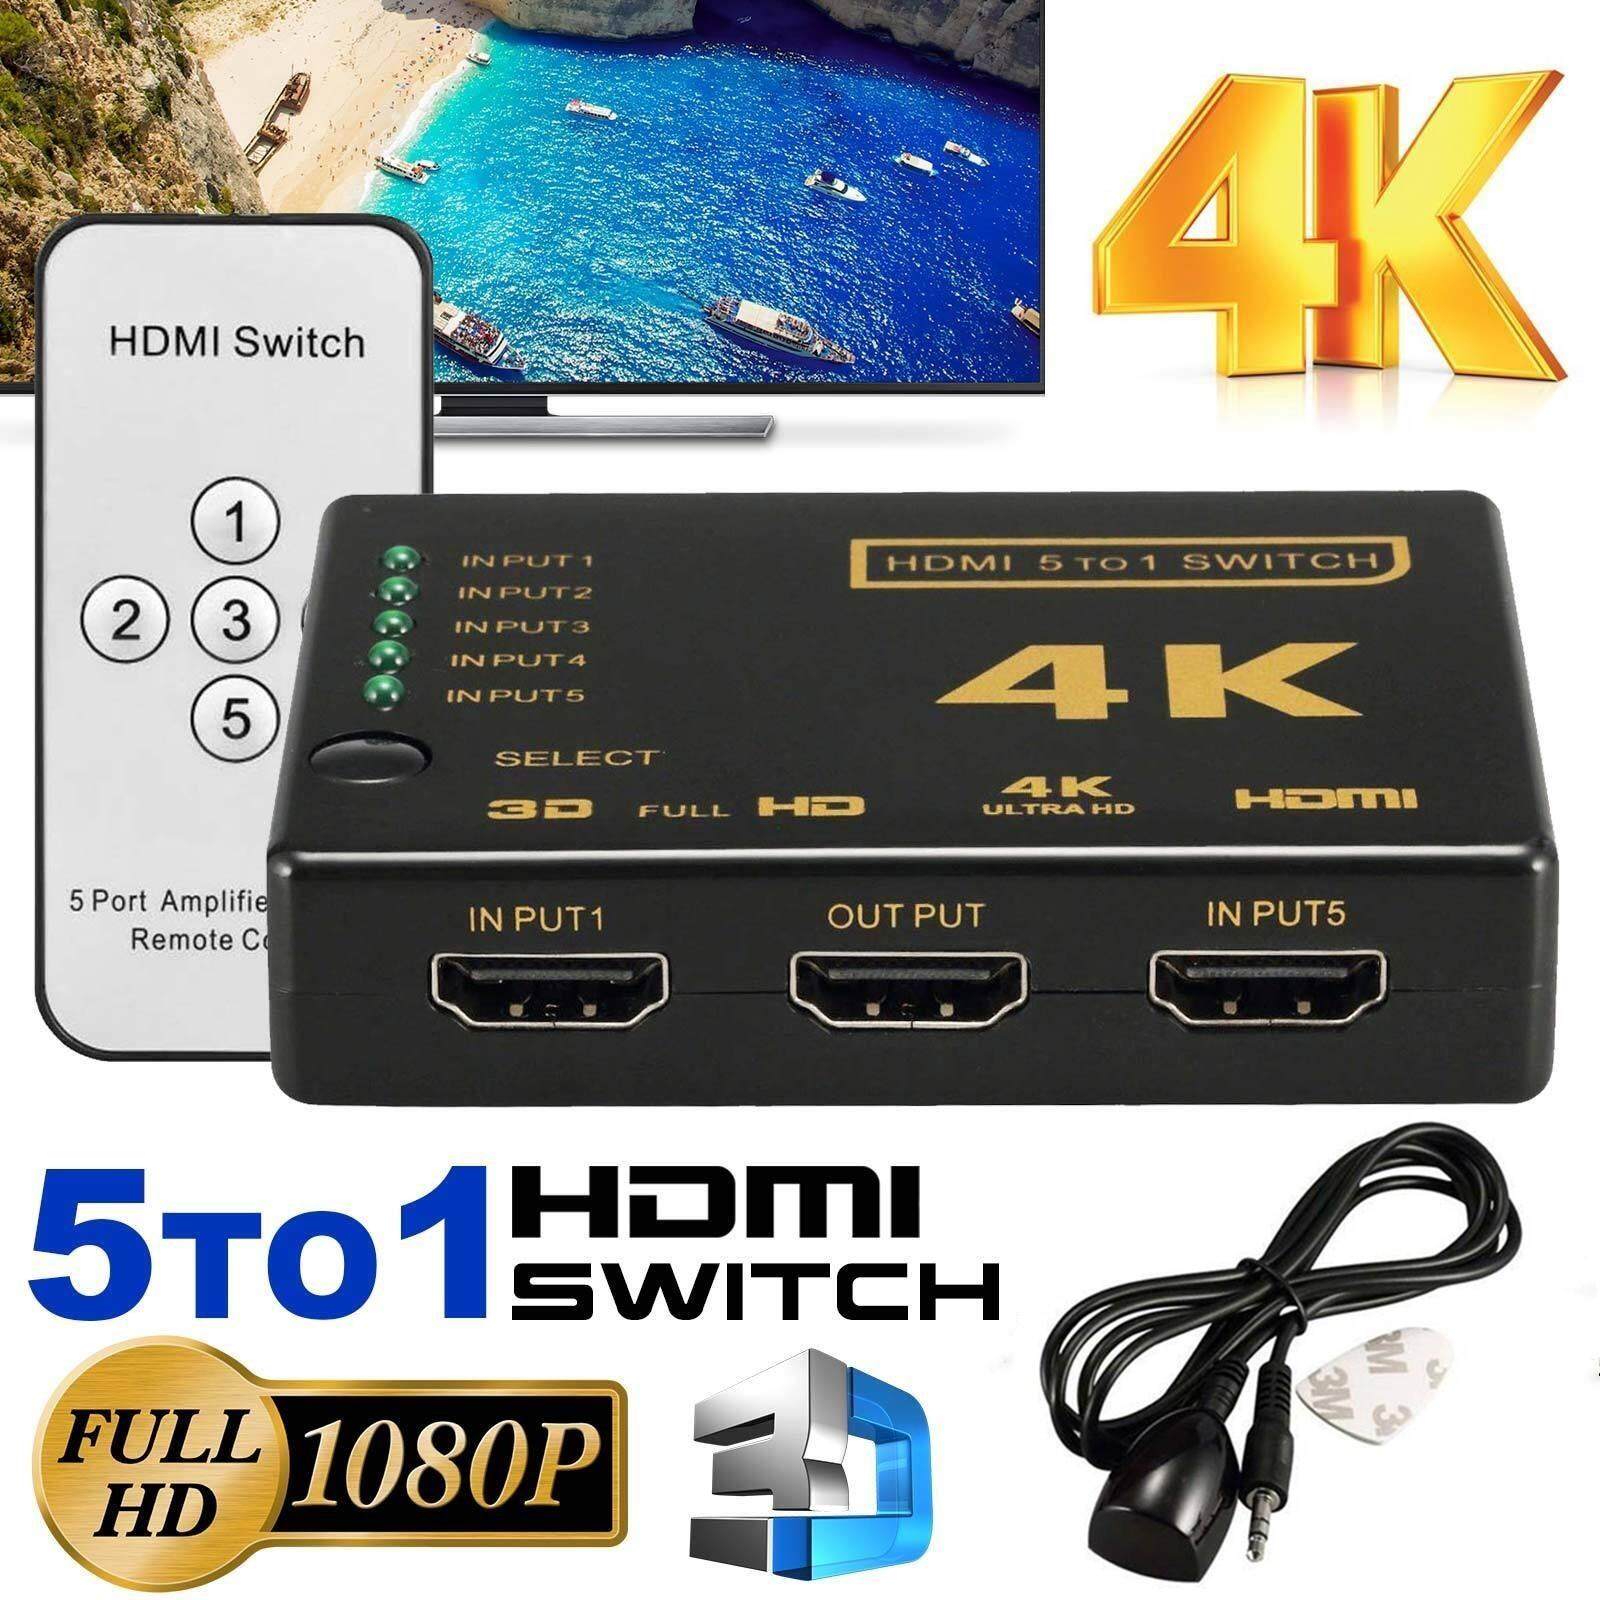 HDMI switch 5x1 SELECTED full hd 3d 4k 1080p With remote